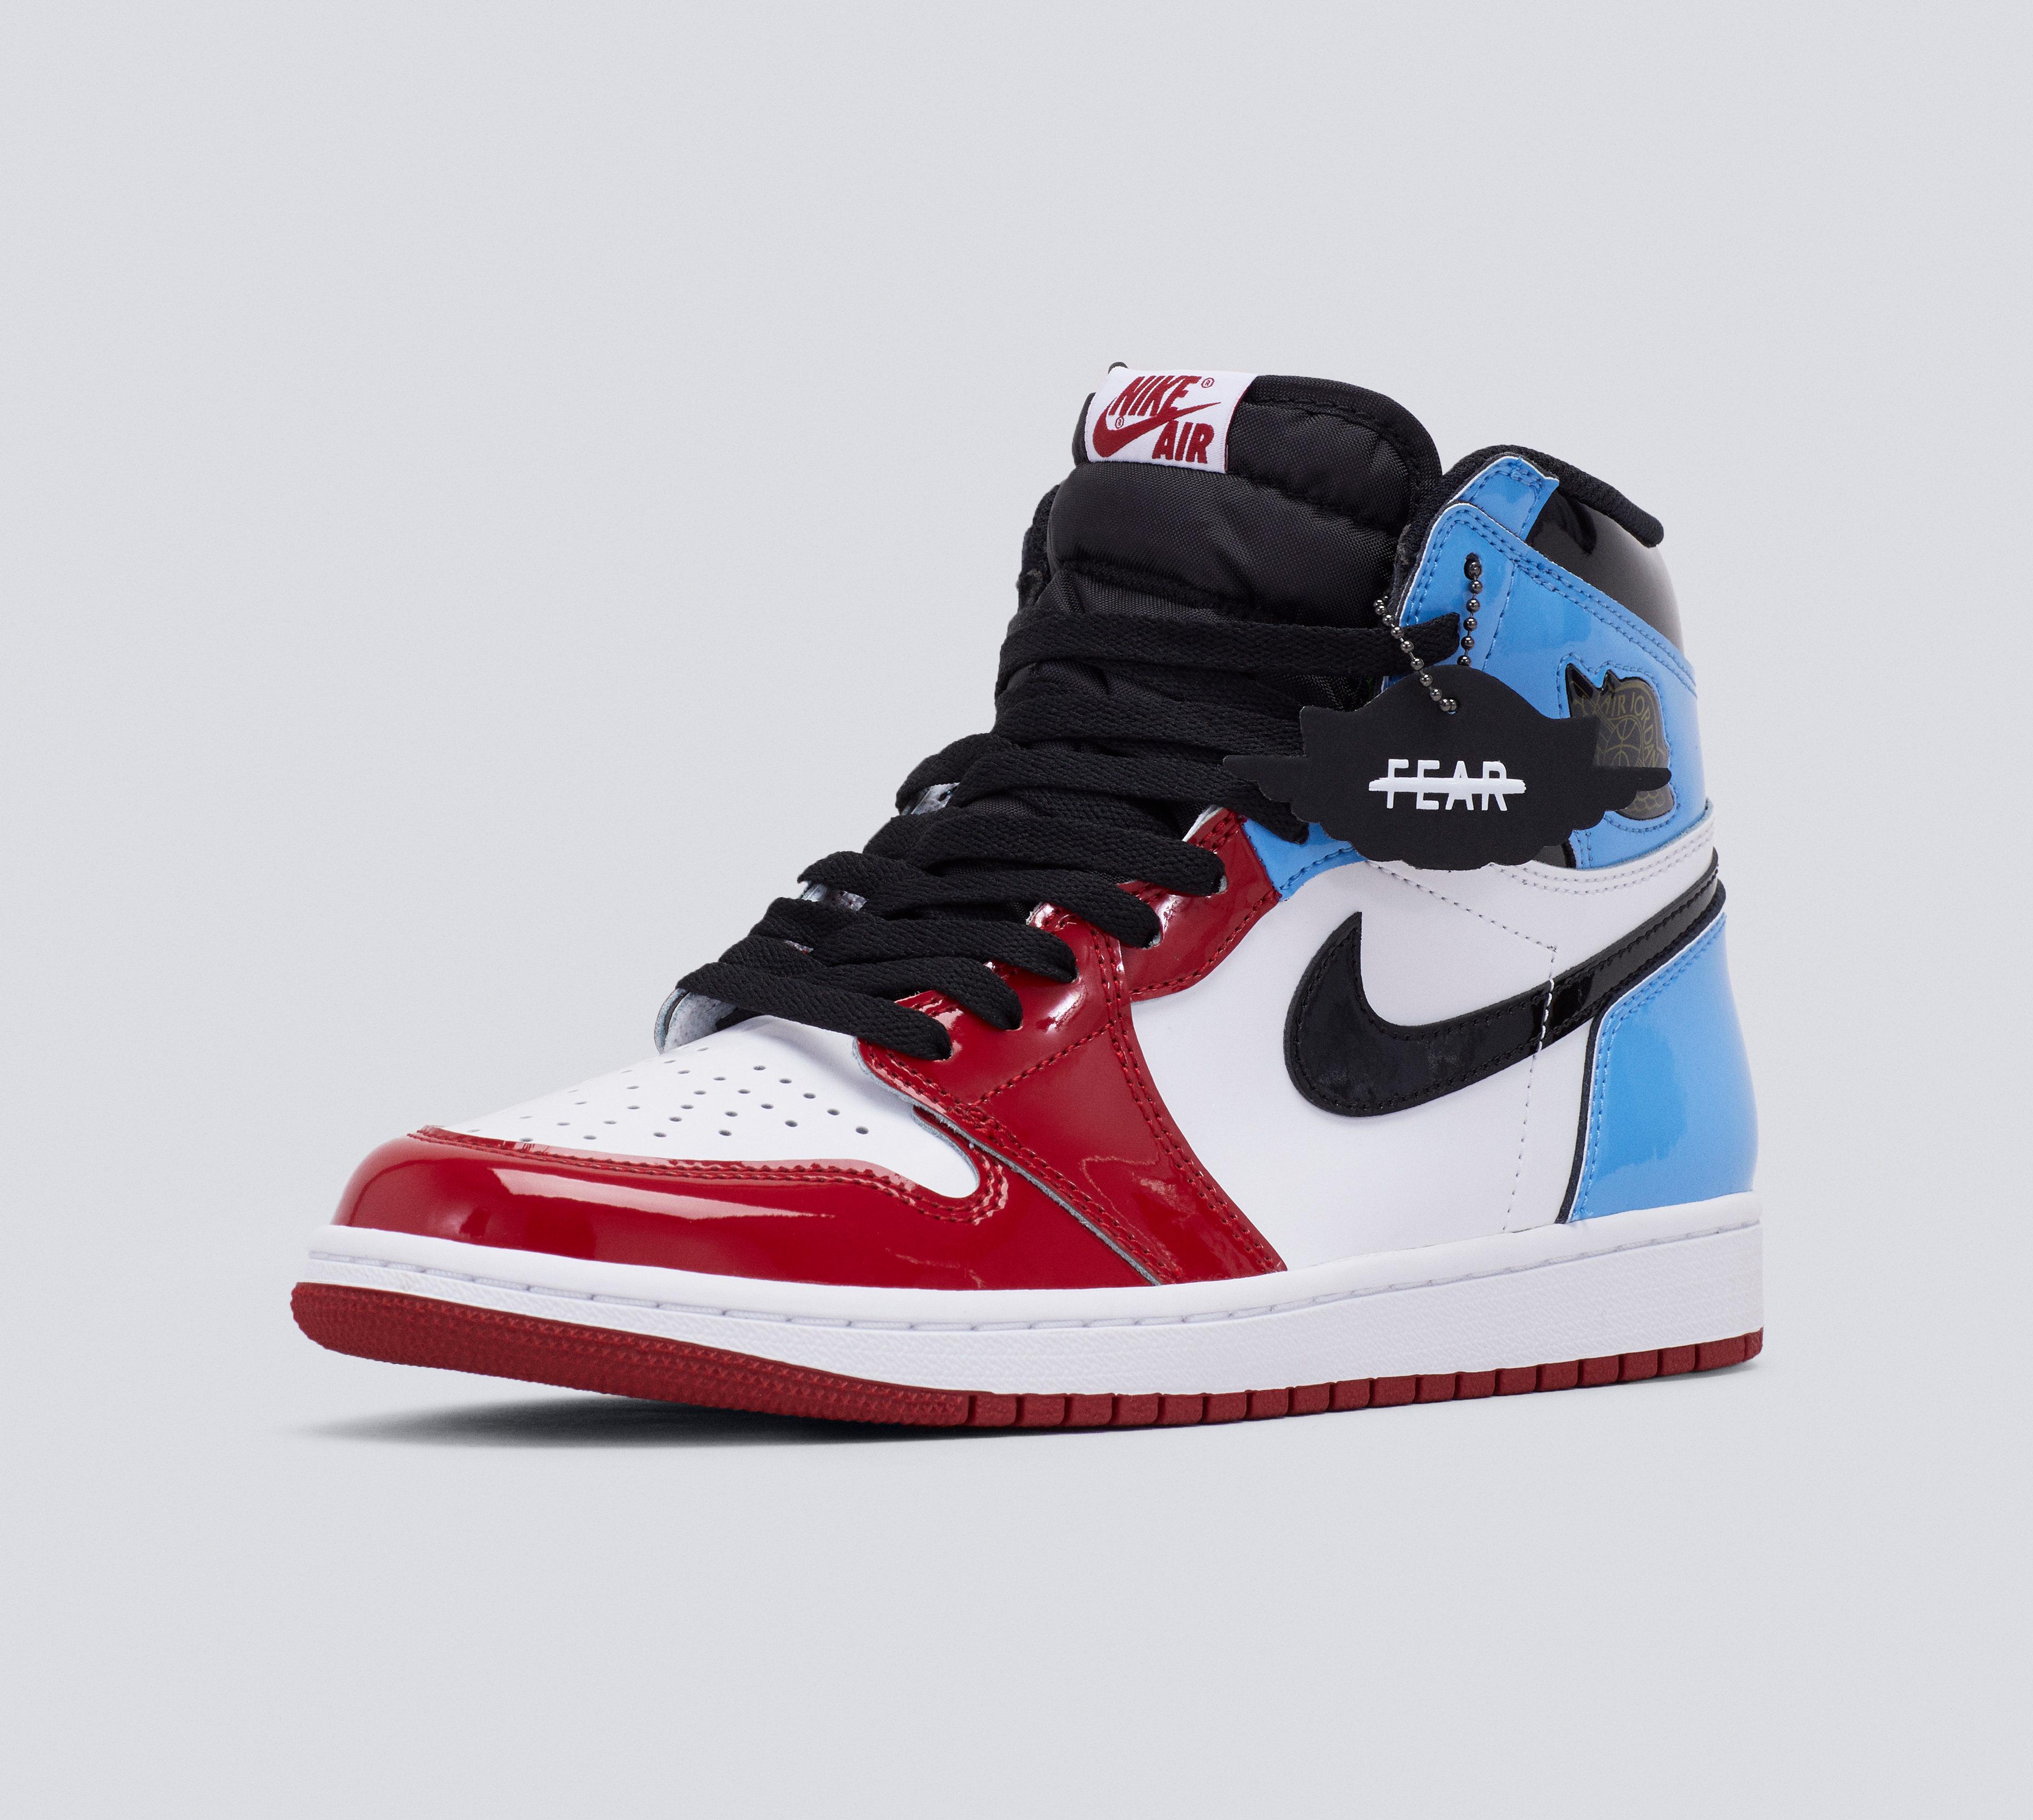 Jordan 1 Fearless UNC Chicago - By The Numbers - StockX News